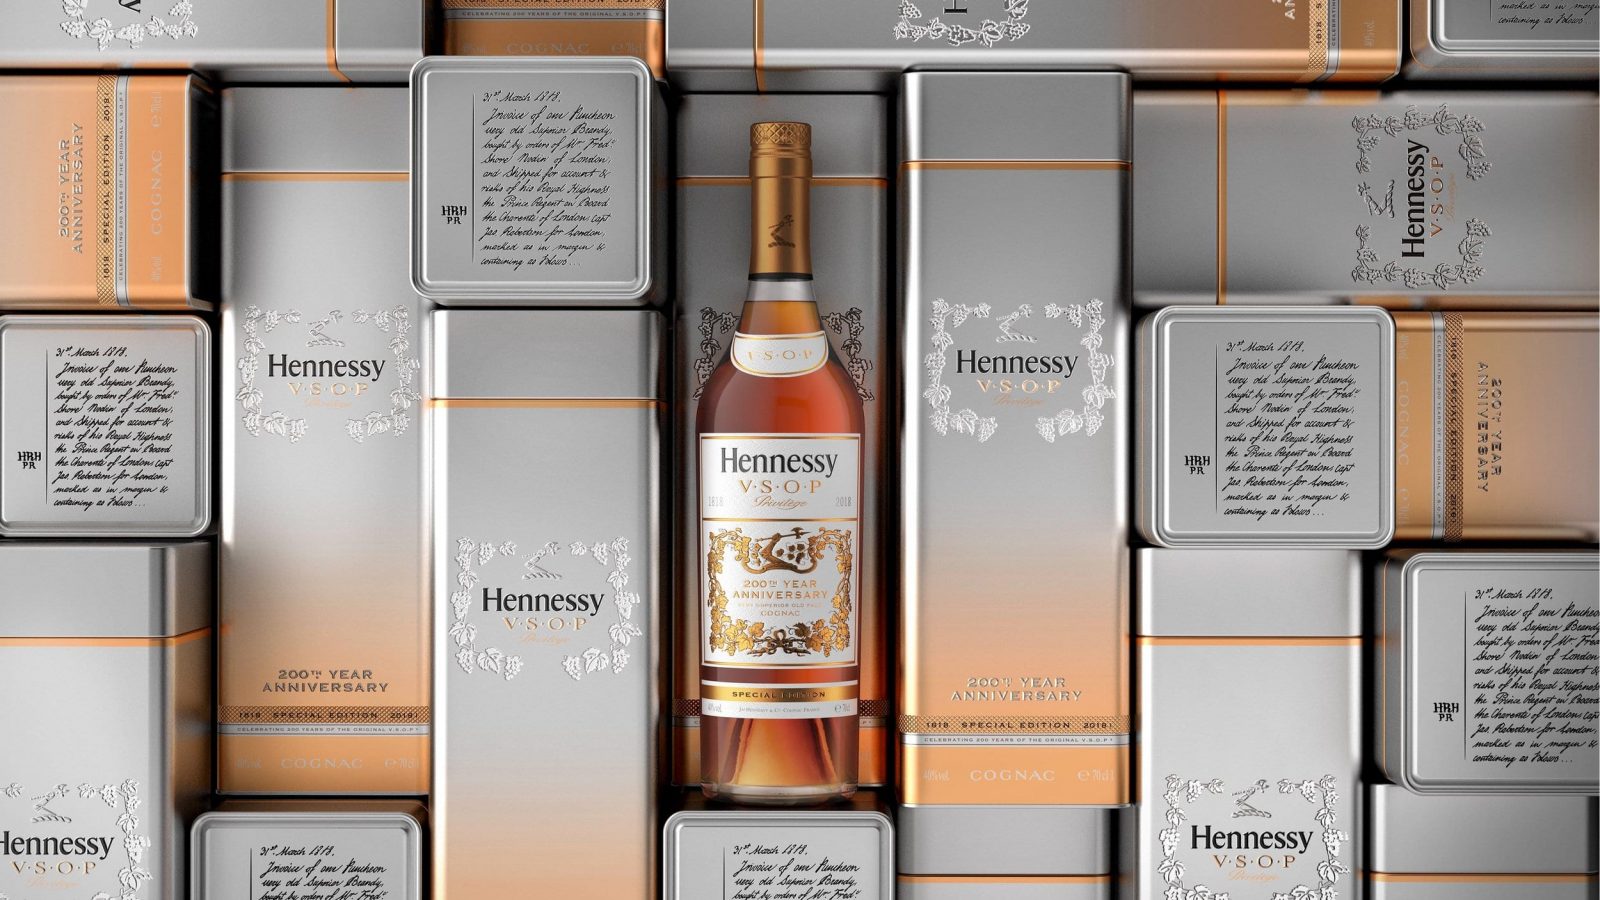 Butterfly Cannon Blend the Past With the Future to Design the Hennessy VSOP Privilège 200 th Anniversary Limited-Edition